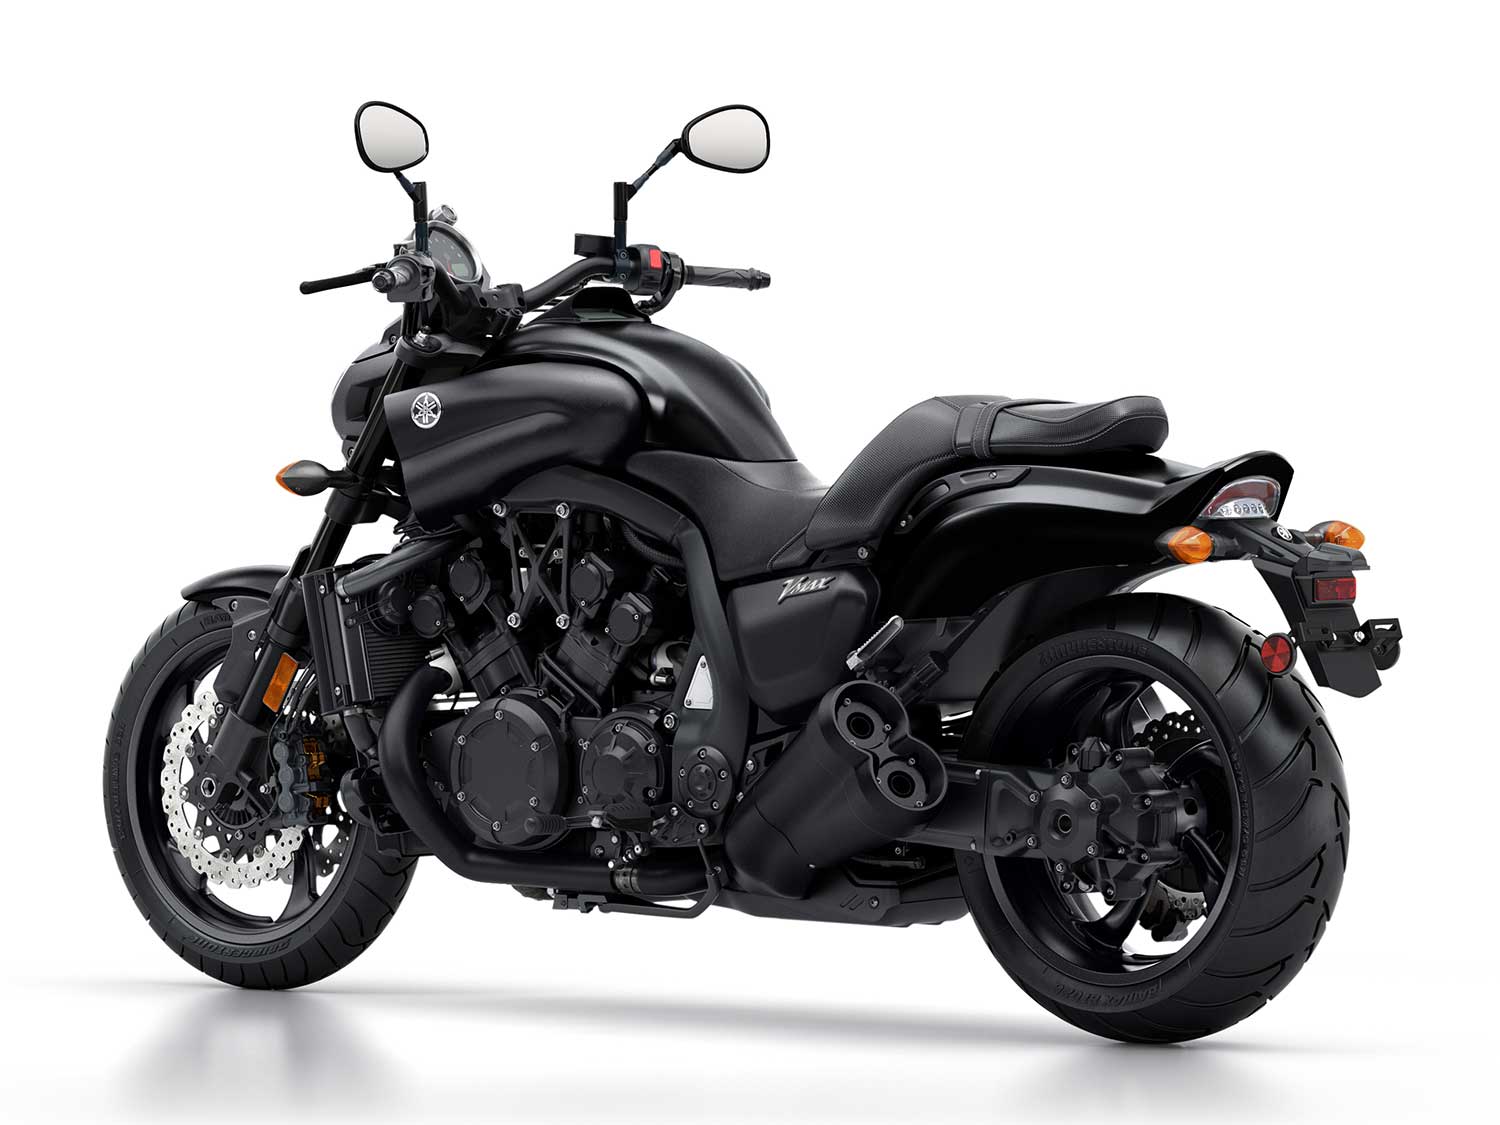 2020 Yamaha VMAX Buyer's Guide: Specs, Photos, Price | Cycle World